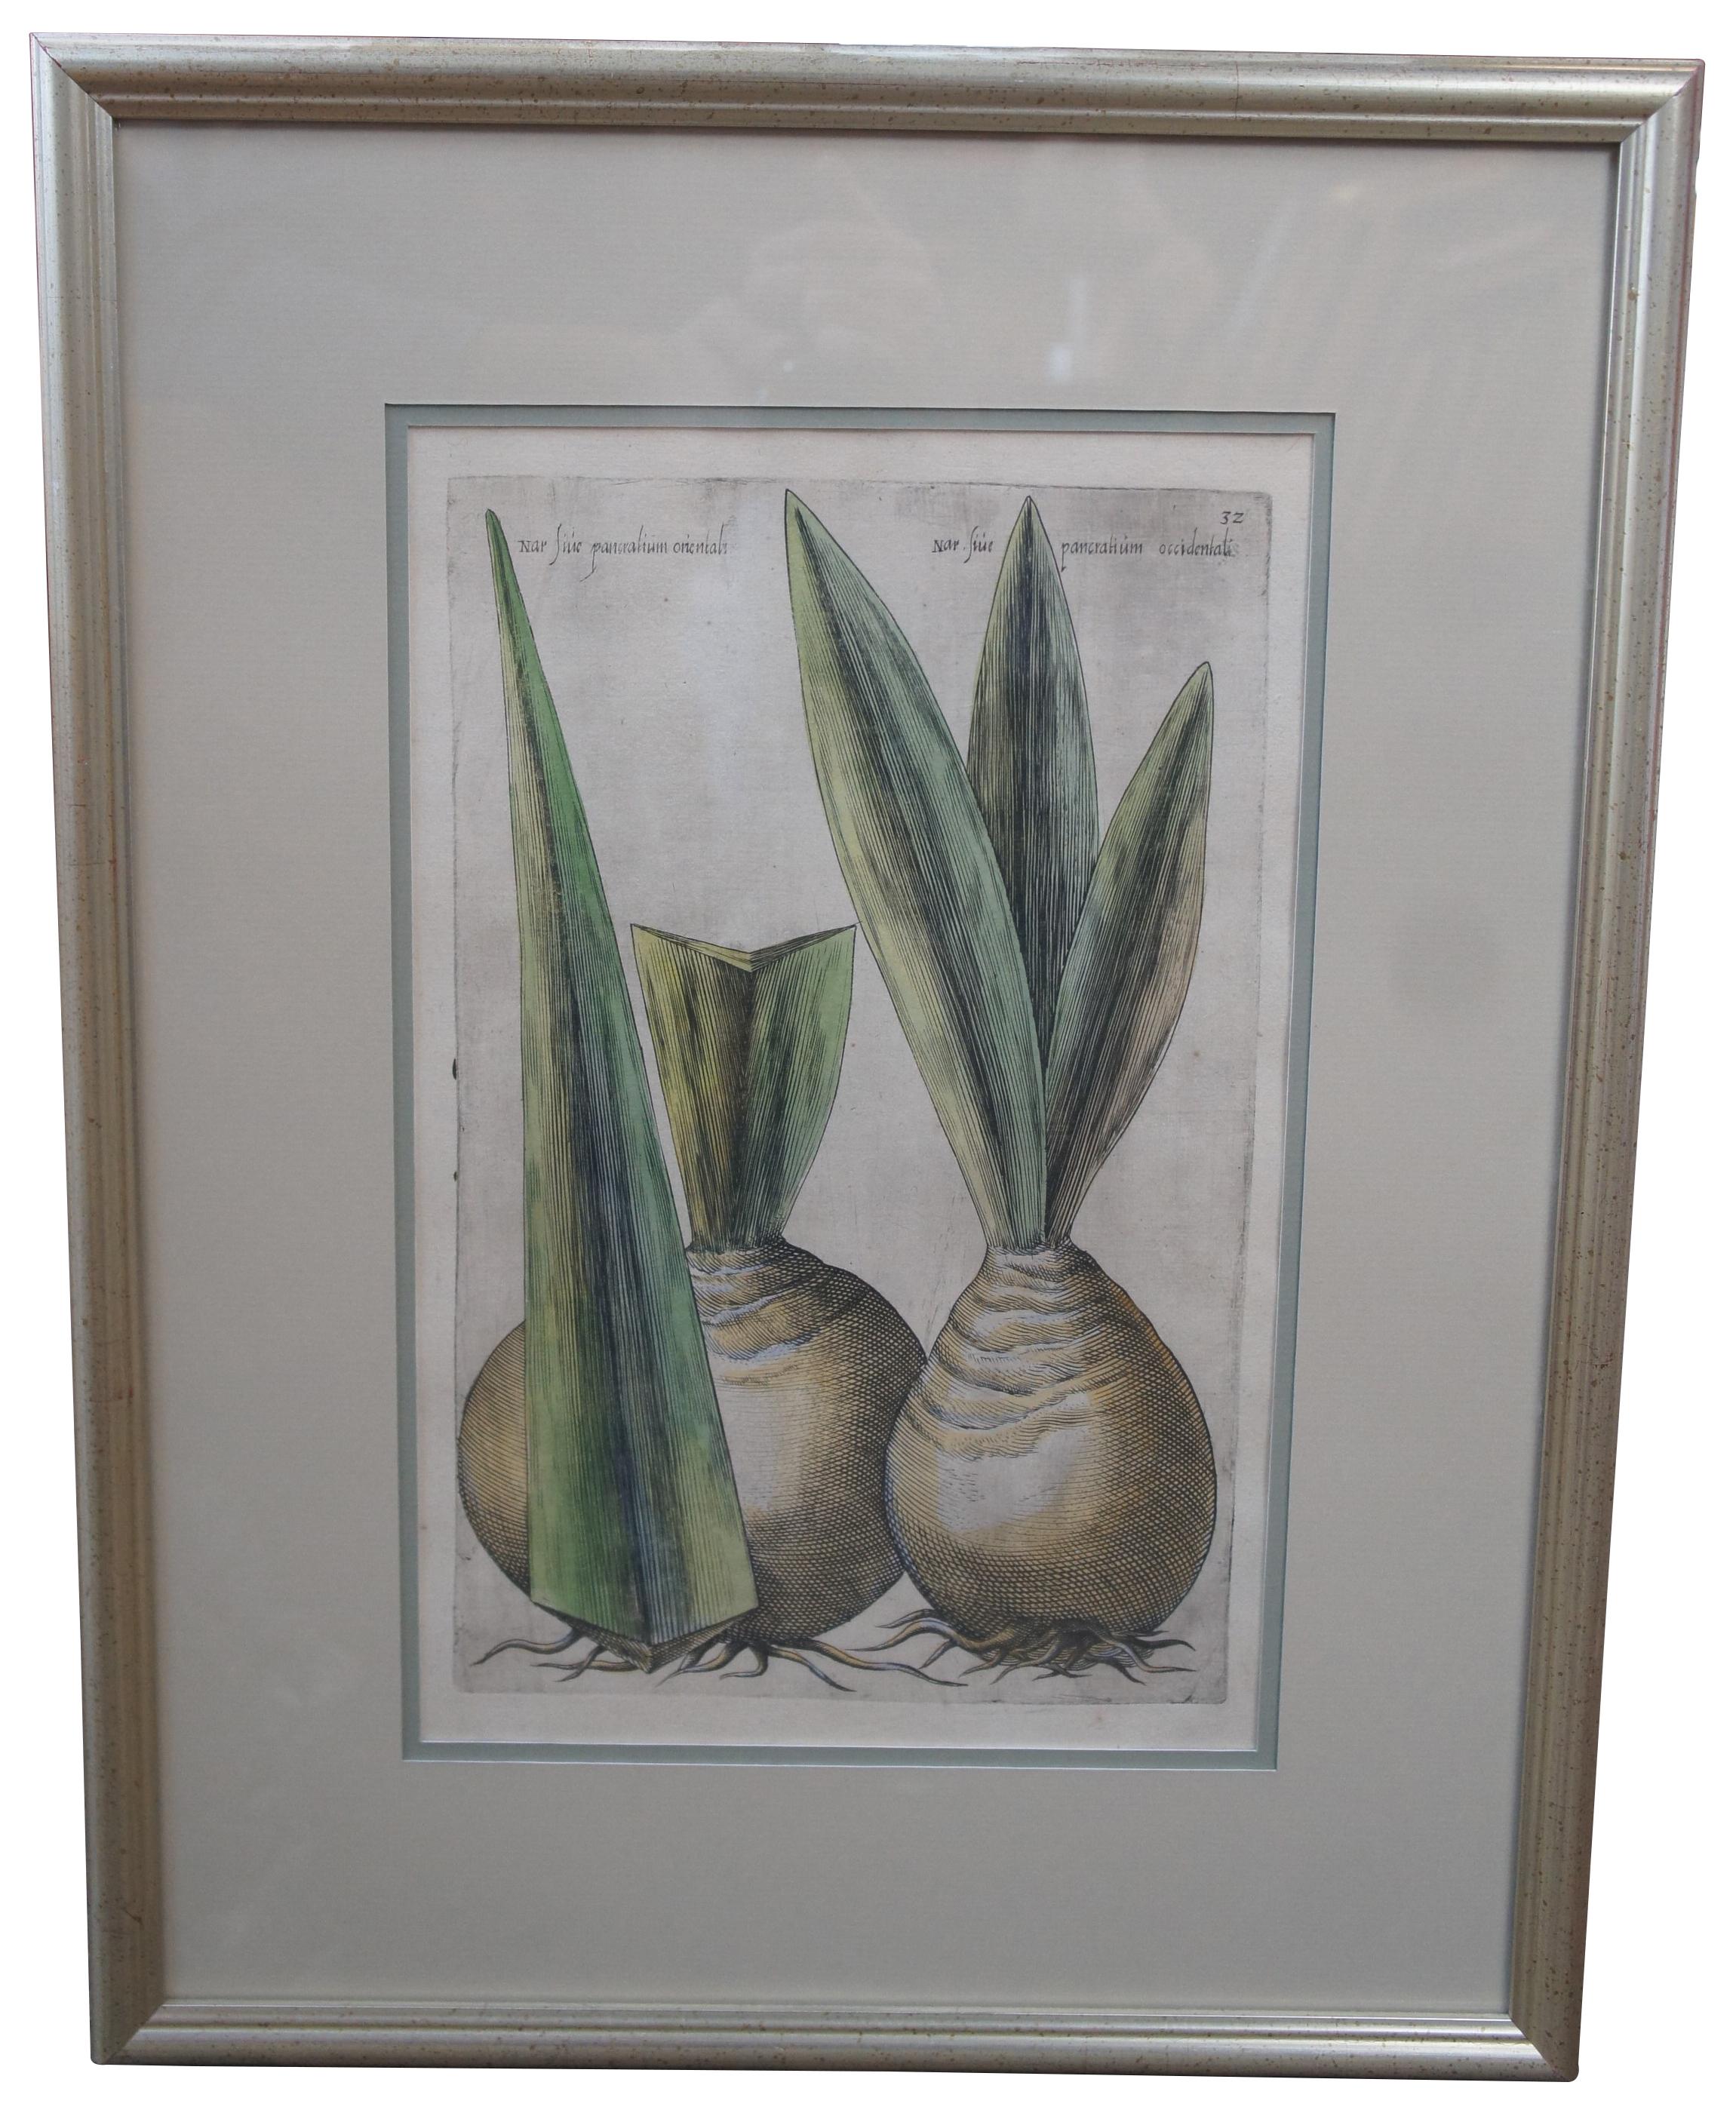 2 Antique Framed Emanuel Sweert Florigriums Botanical Latin Plant Engravings In Good Condition For Sale In Dayton, OH